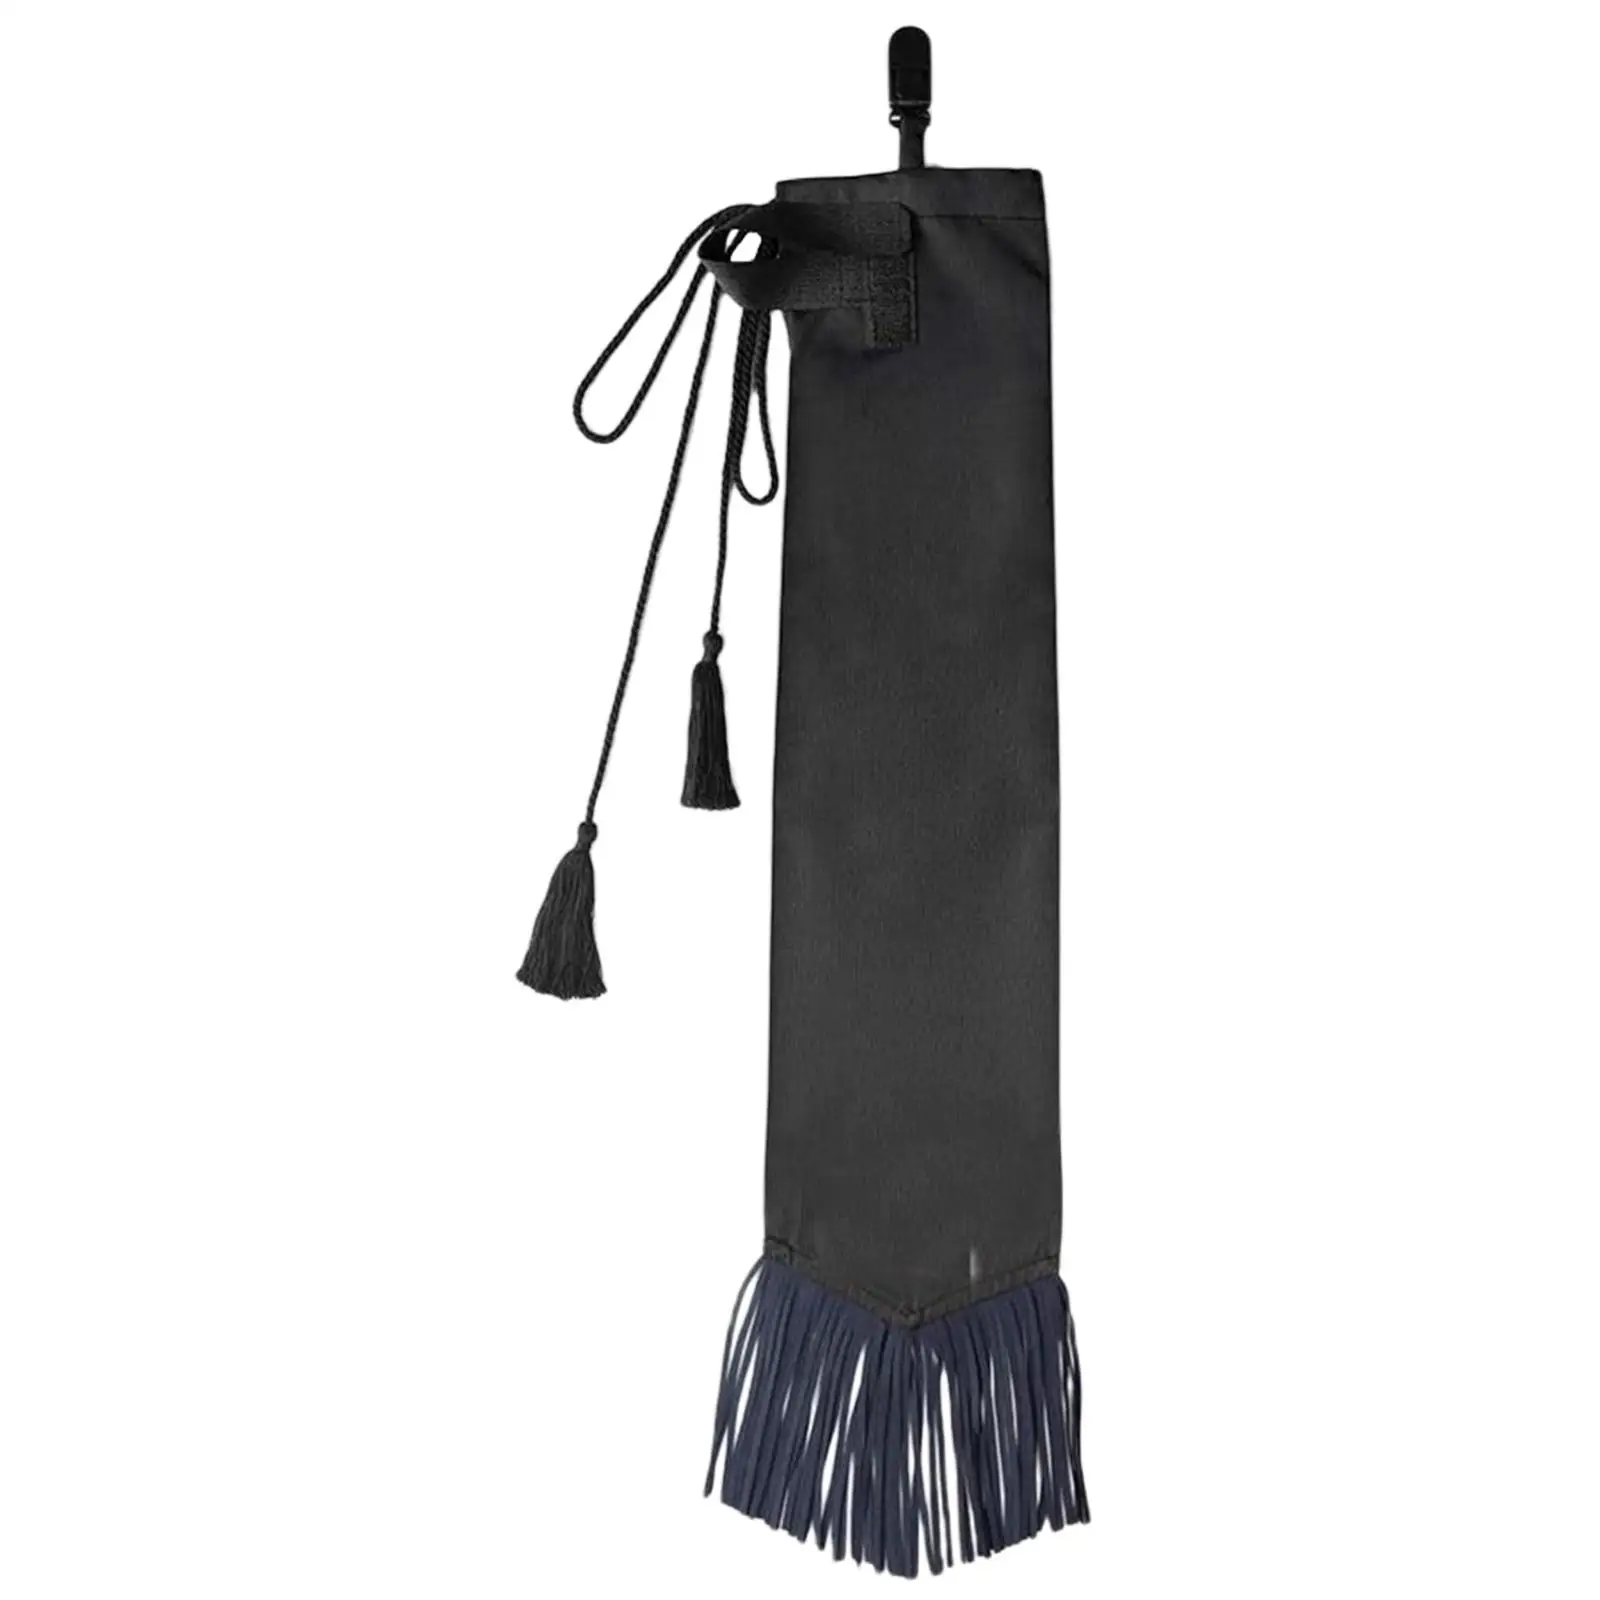 Bag Wrap with Fringe Protective Bag for Accessories Supplies